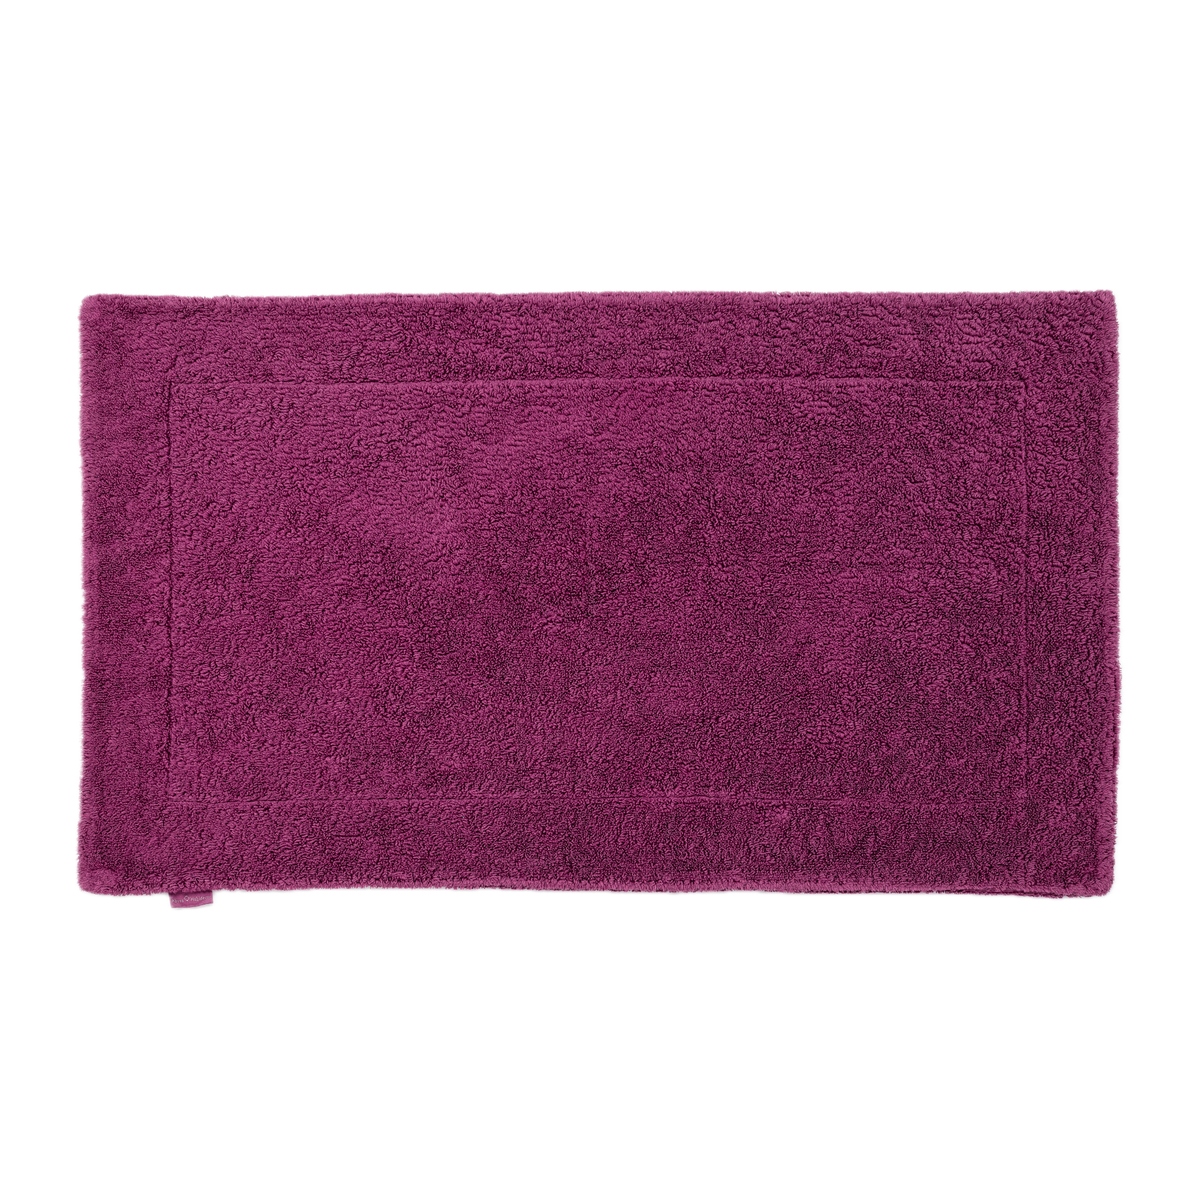 Abyss Double Bath Tub Mat in Baton Rouge (514) Color